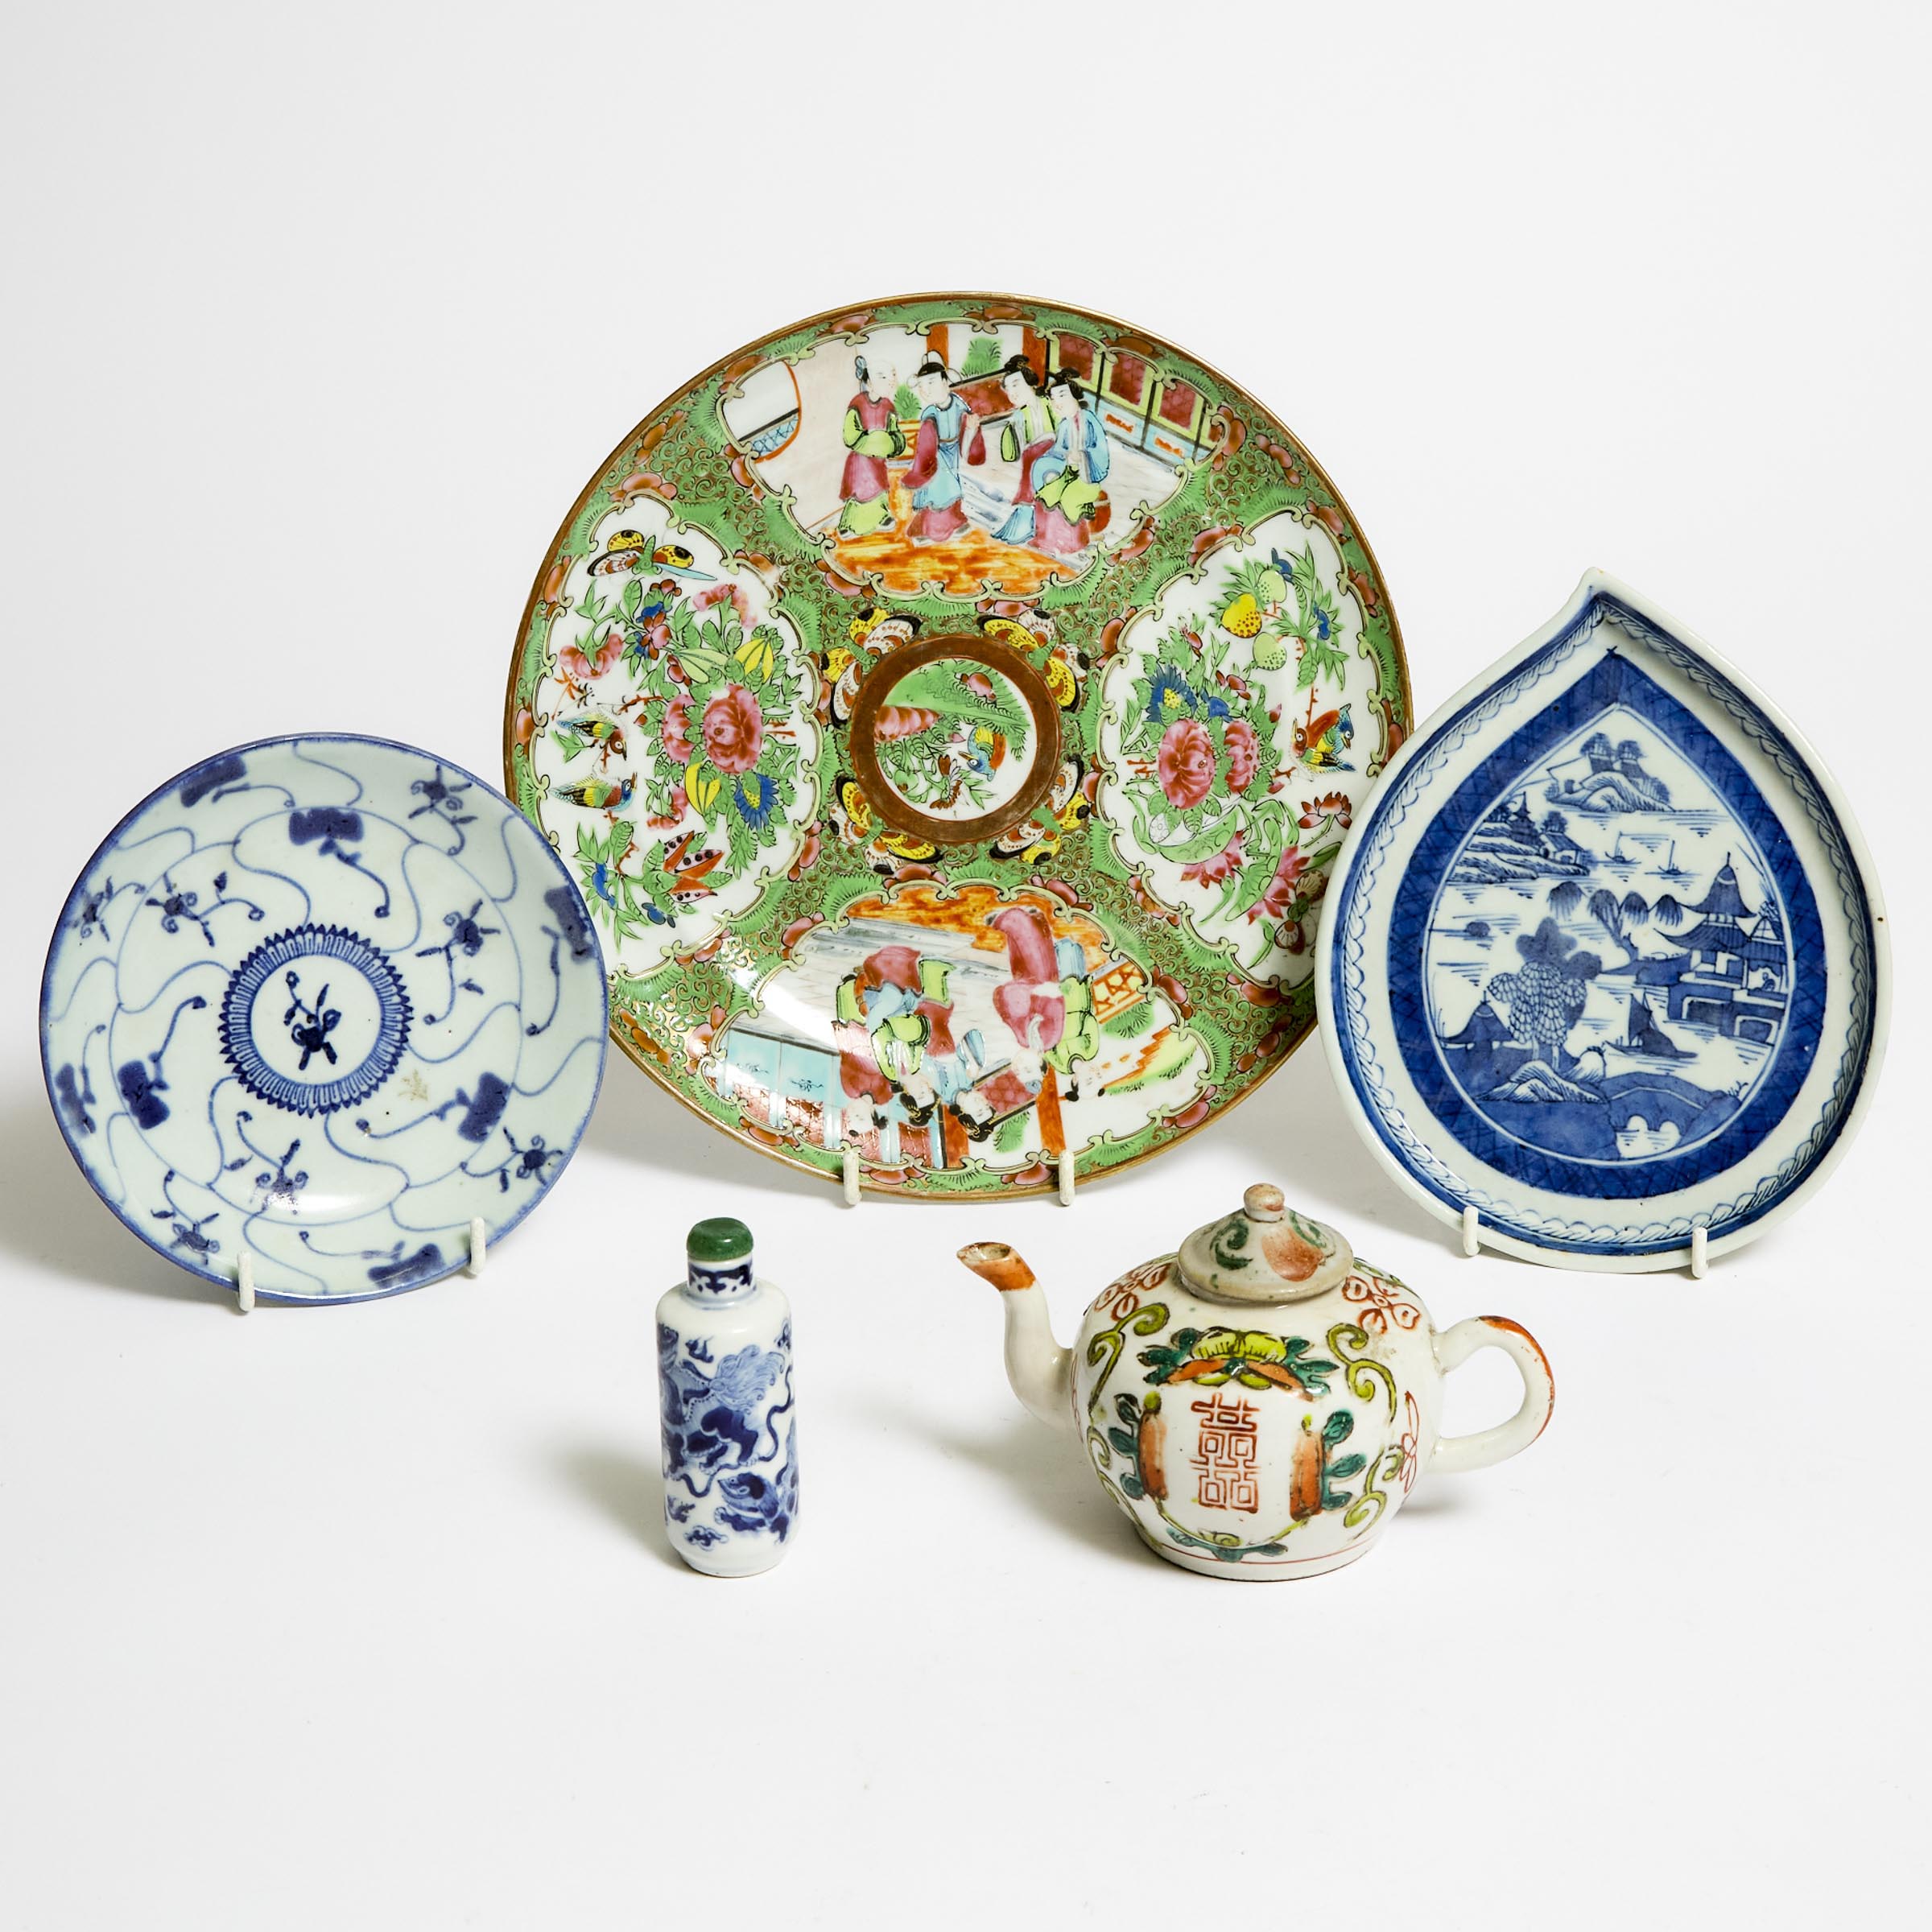 A Group of Five Chinese Porcelain Wares, 18th/19th Century